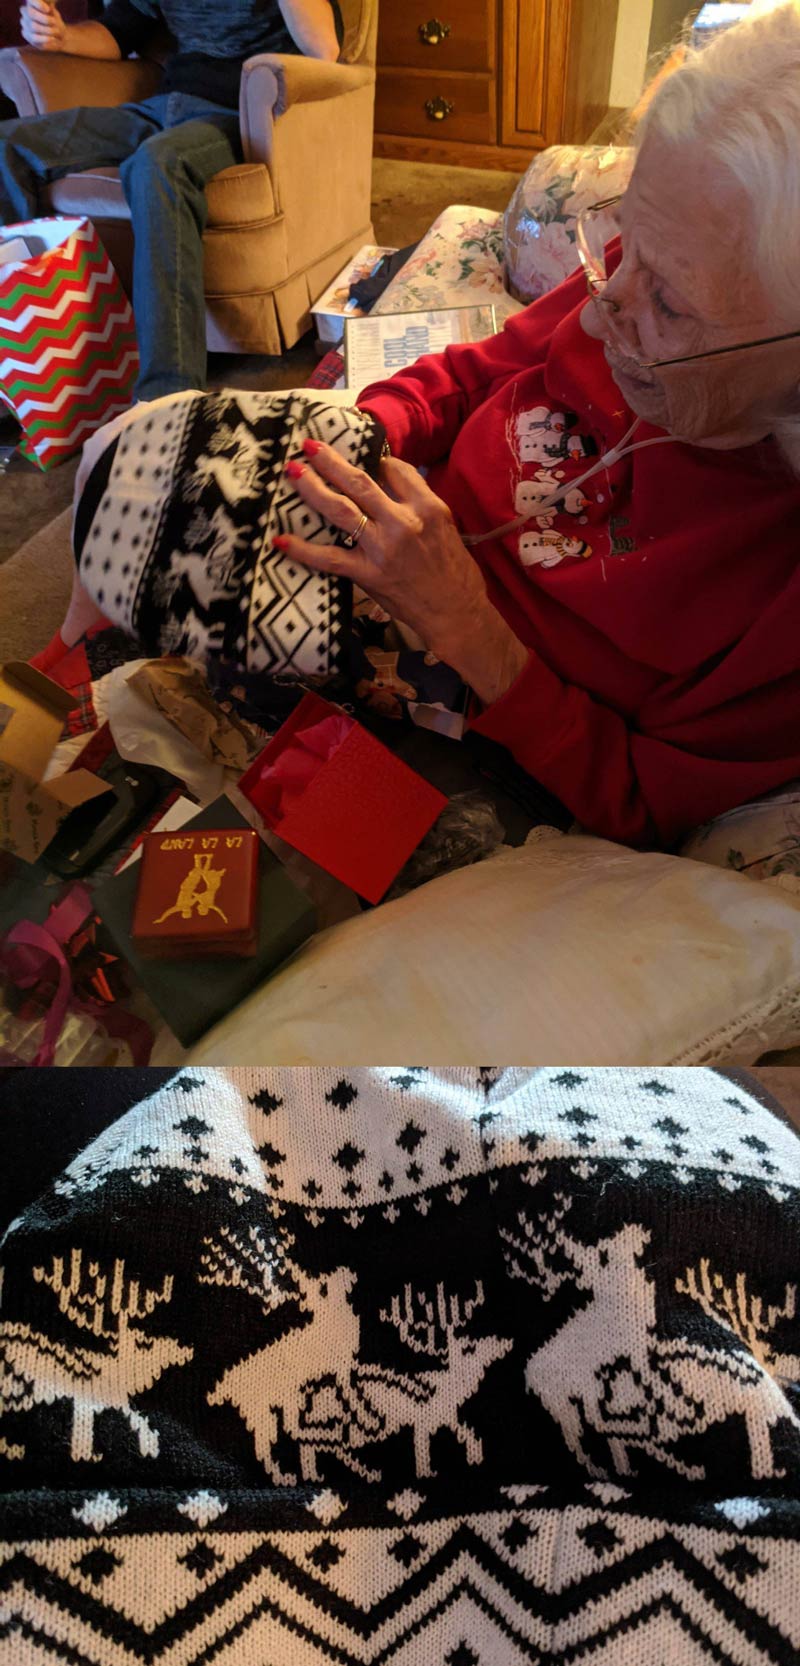 Grandma realizing the "cute little reindeer" on the beanie she gave me are "having a party"